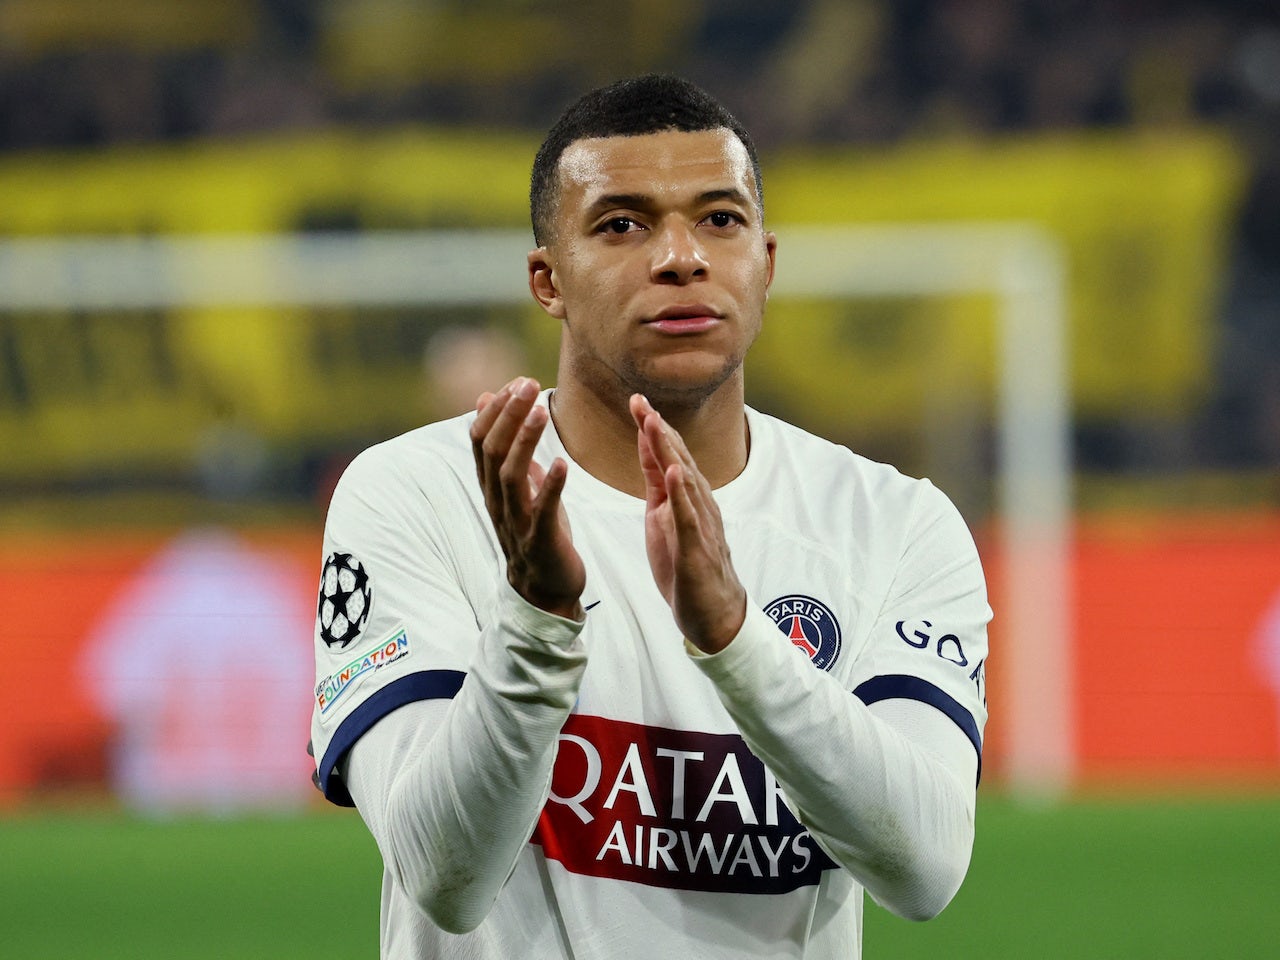 Real Madrid 'to offer £23m salary with £110m signing-on bonus to Kylian Mbappe'